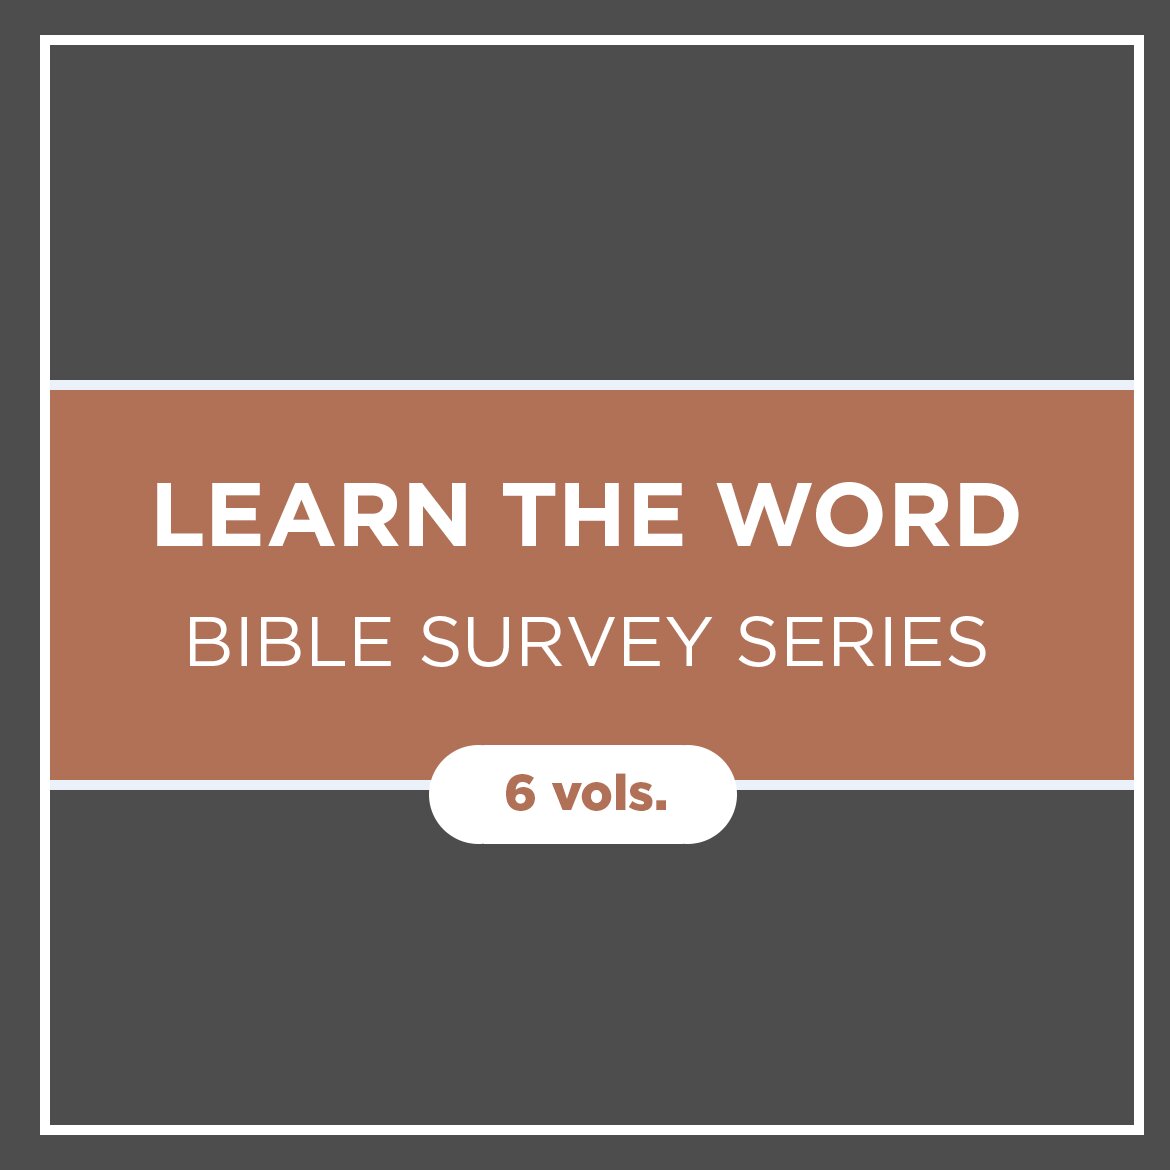 Learn the Word Bible Survey Series (6 vols.)